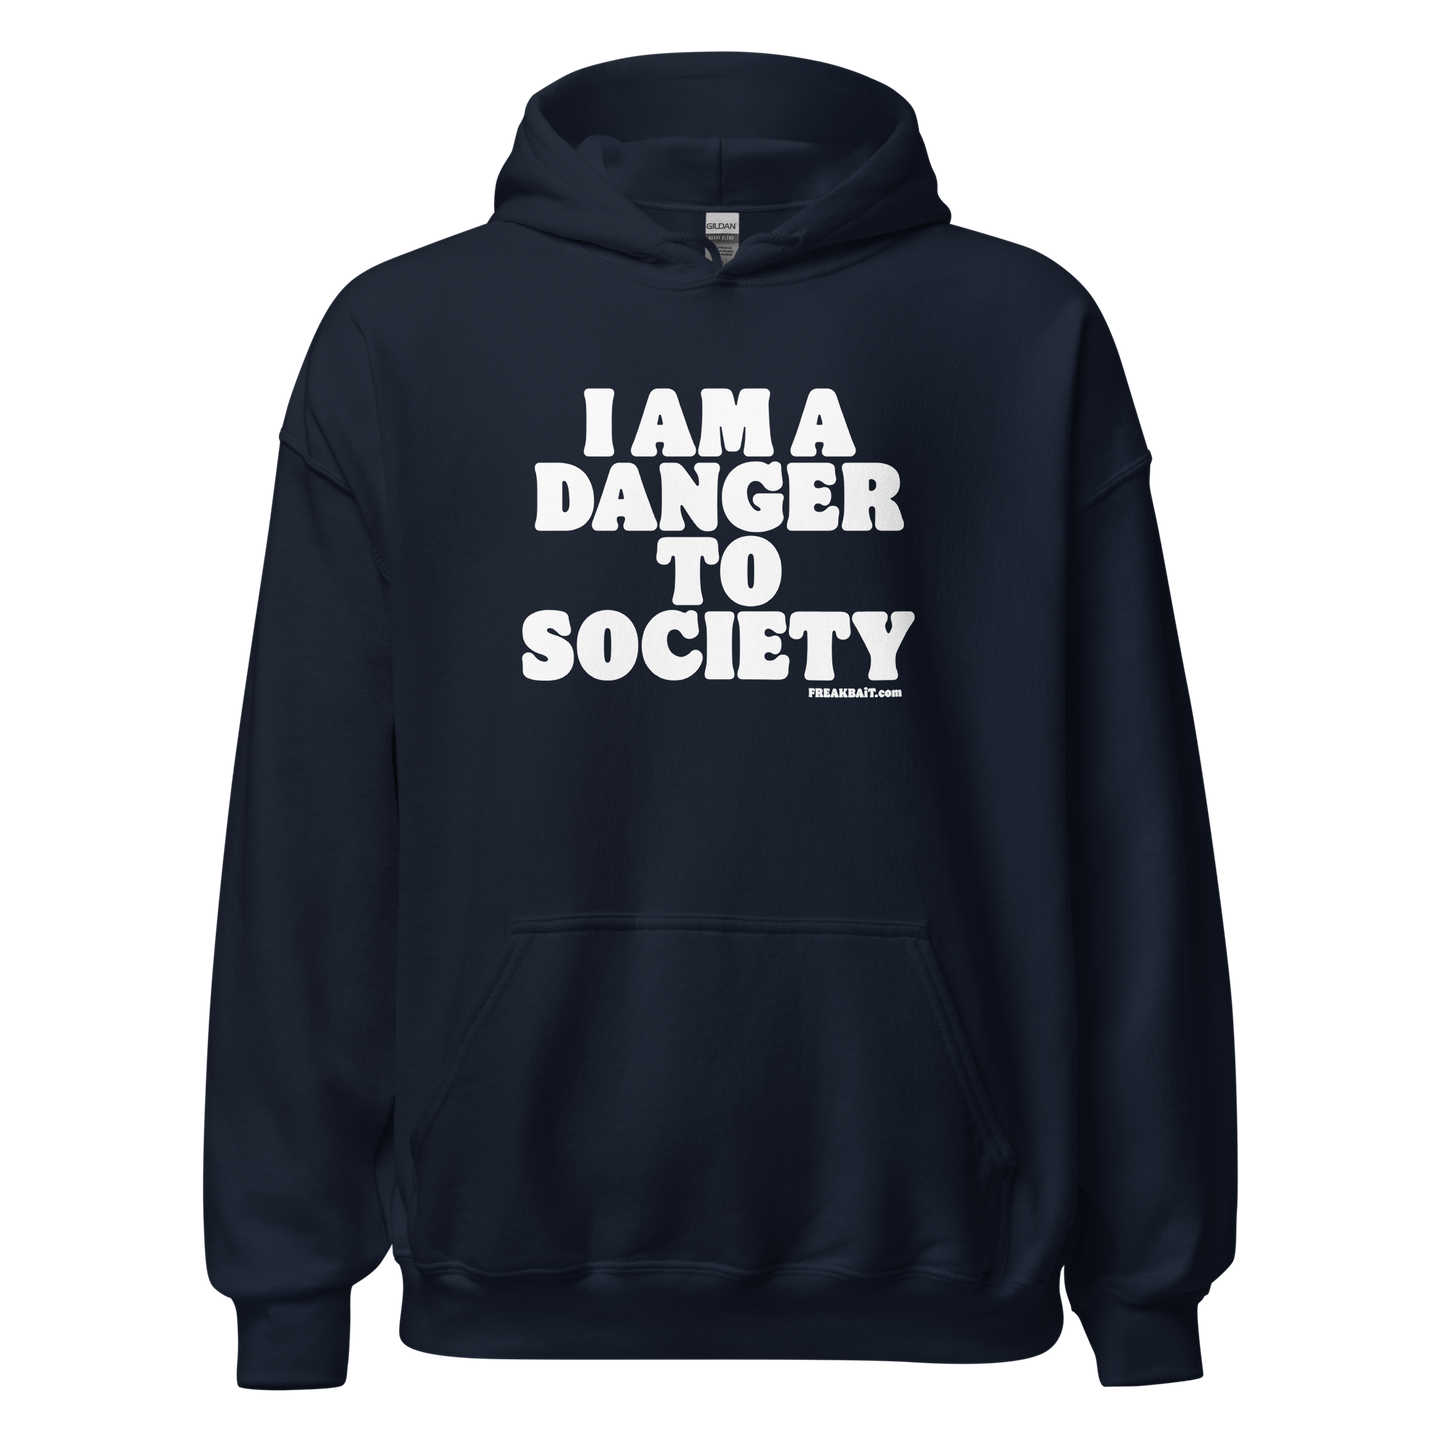 DANGER TO SOCIETY (hoodie)